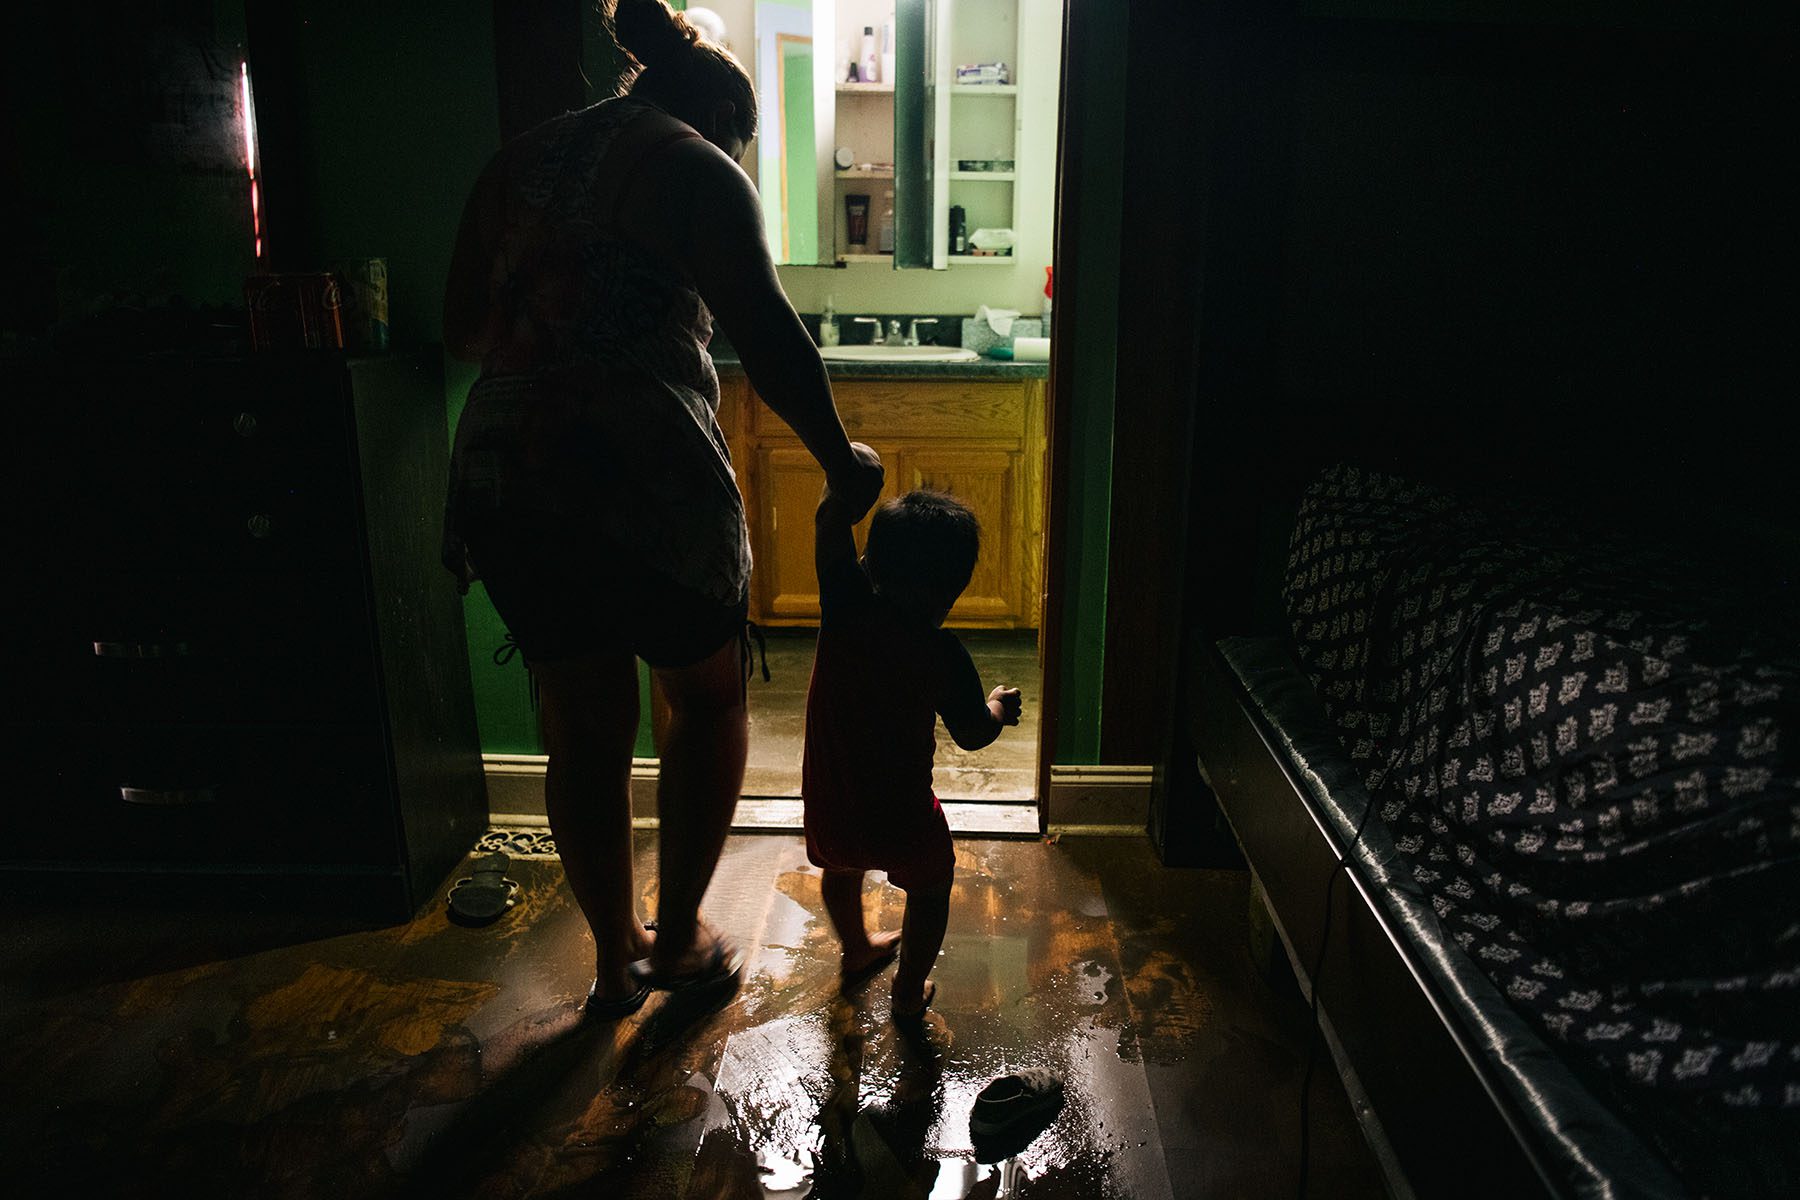 A woman holds a toddler as they walk through a flooded home.